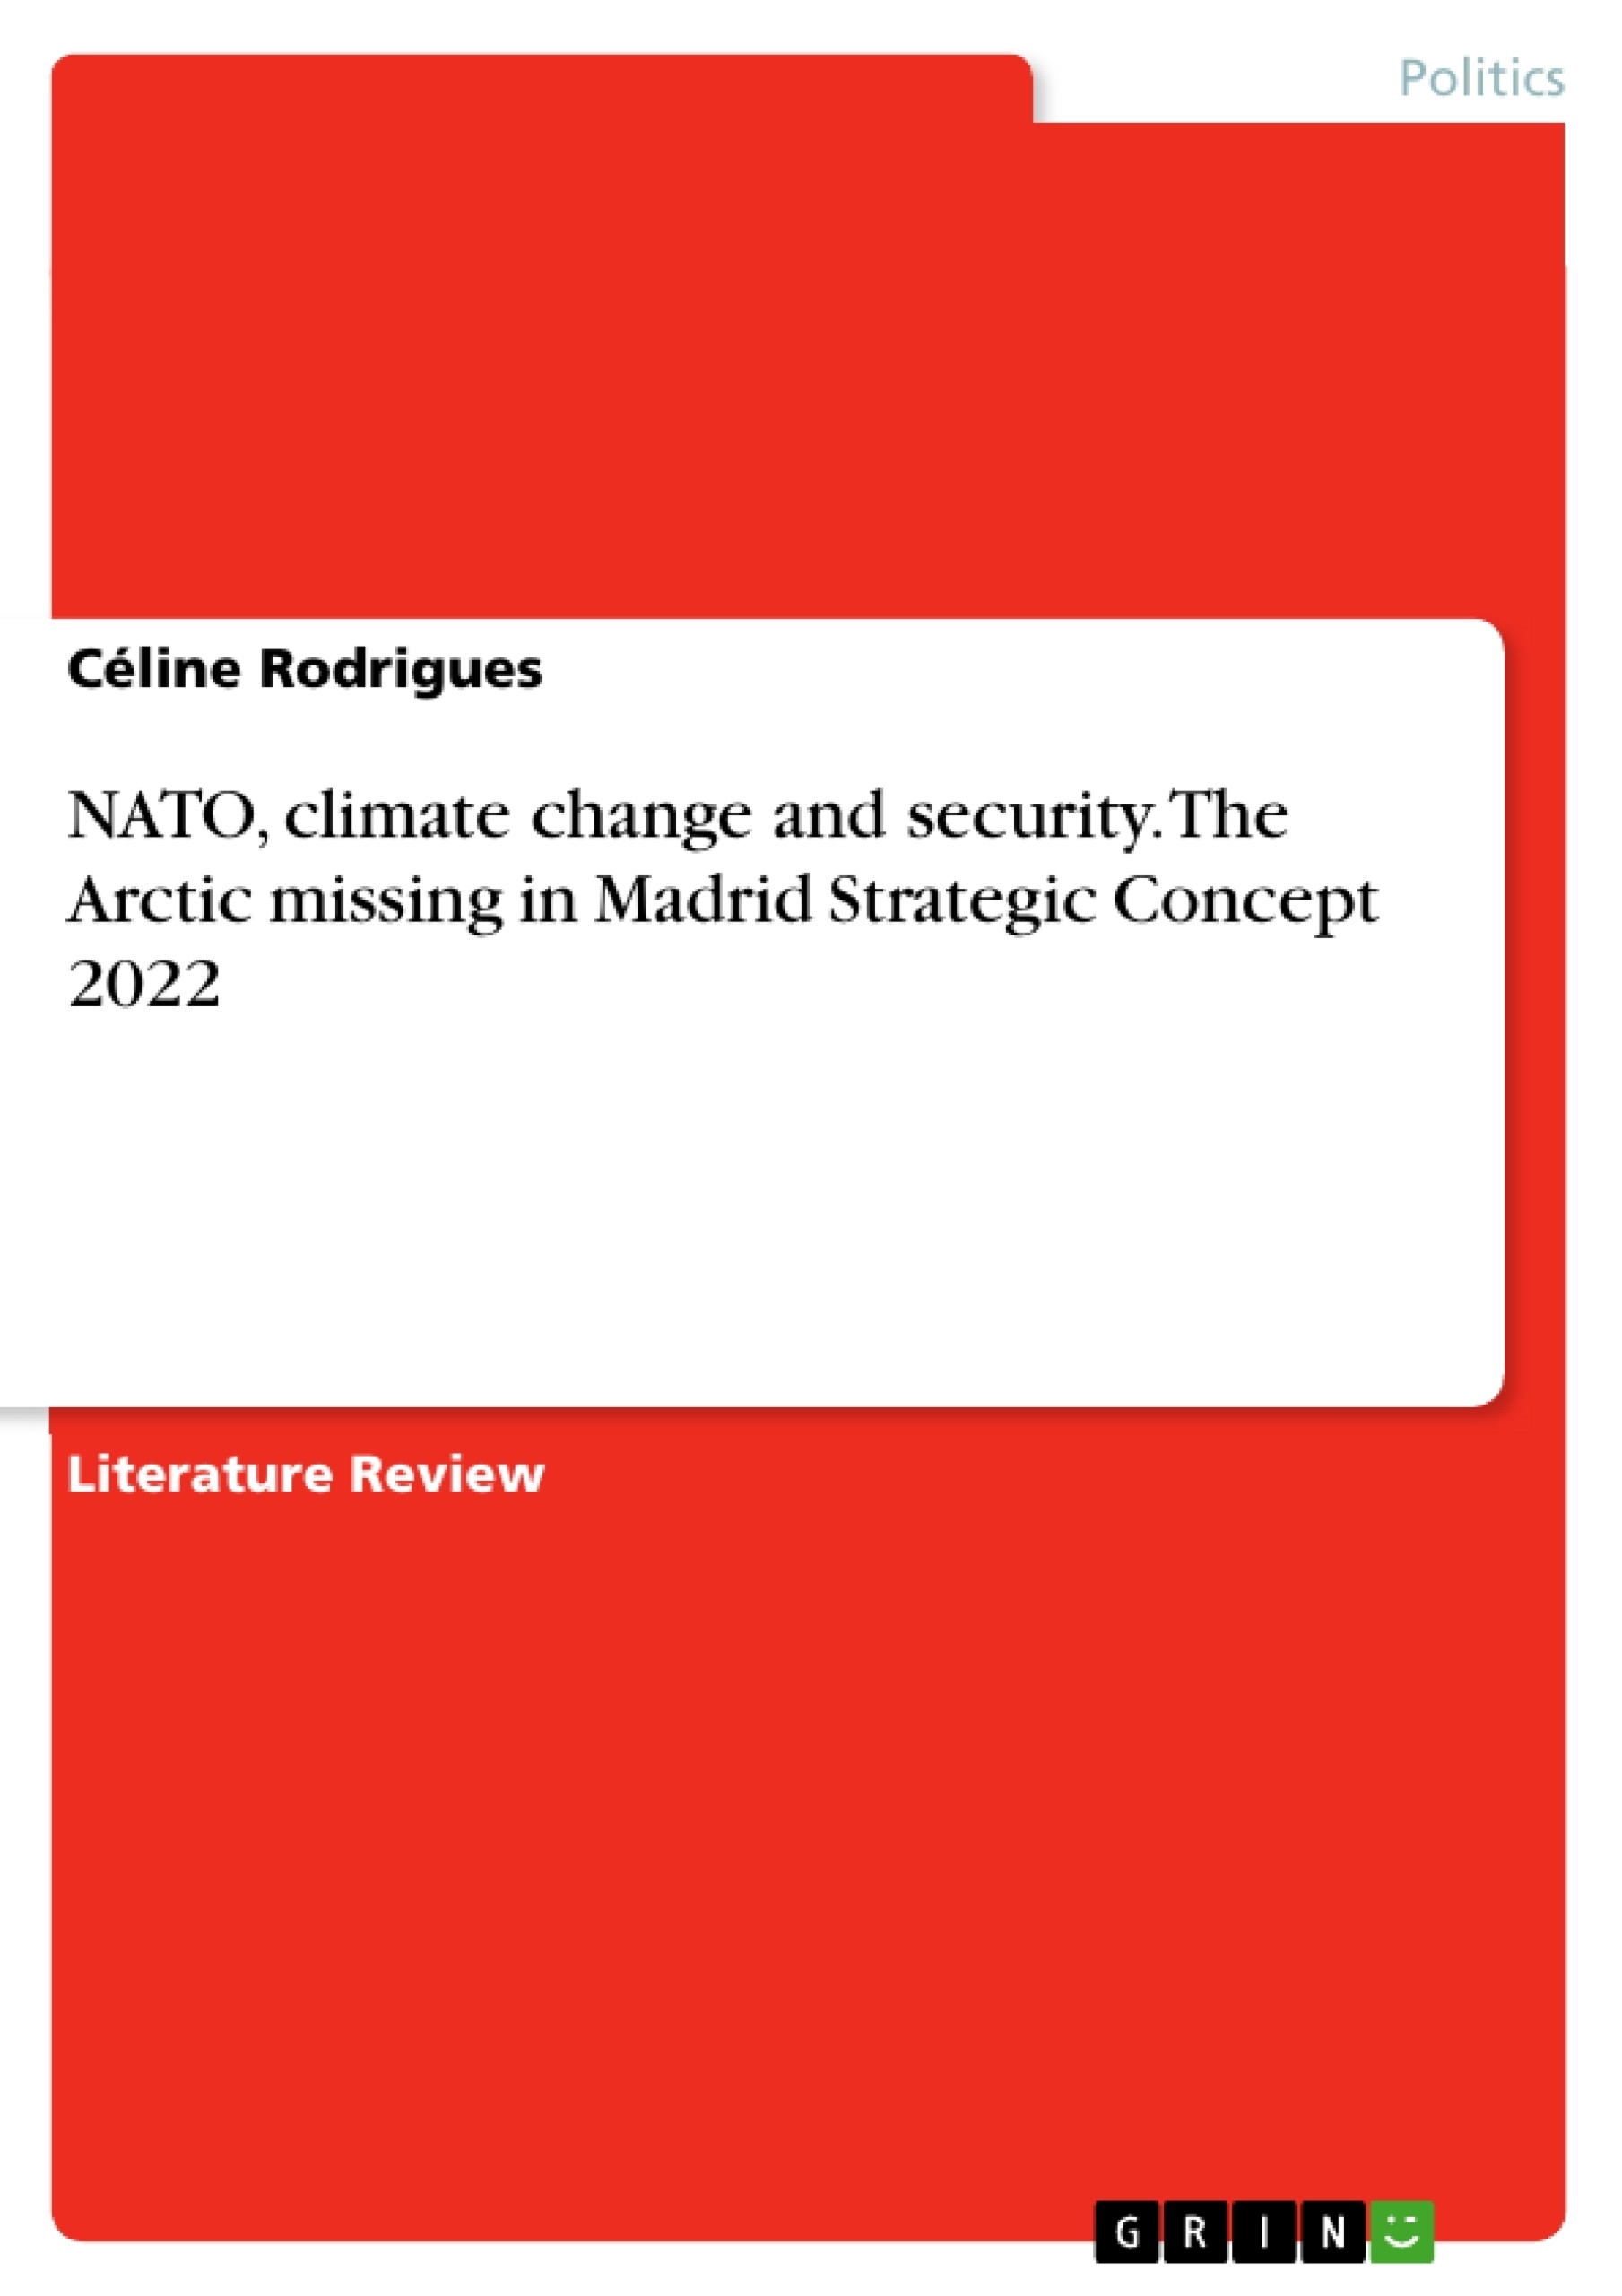 Titel: NATO, climate change and security. The Arctic missing in Madrid Strategic Concept 2022